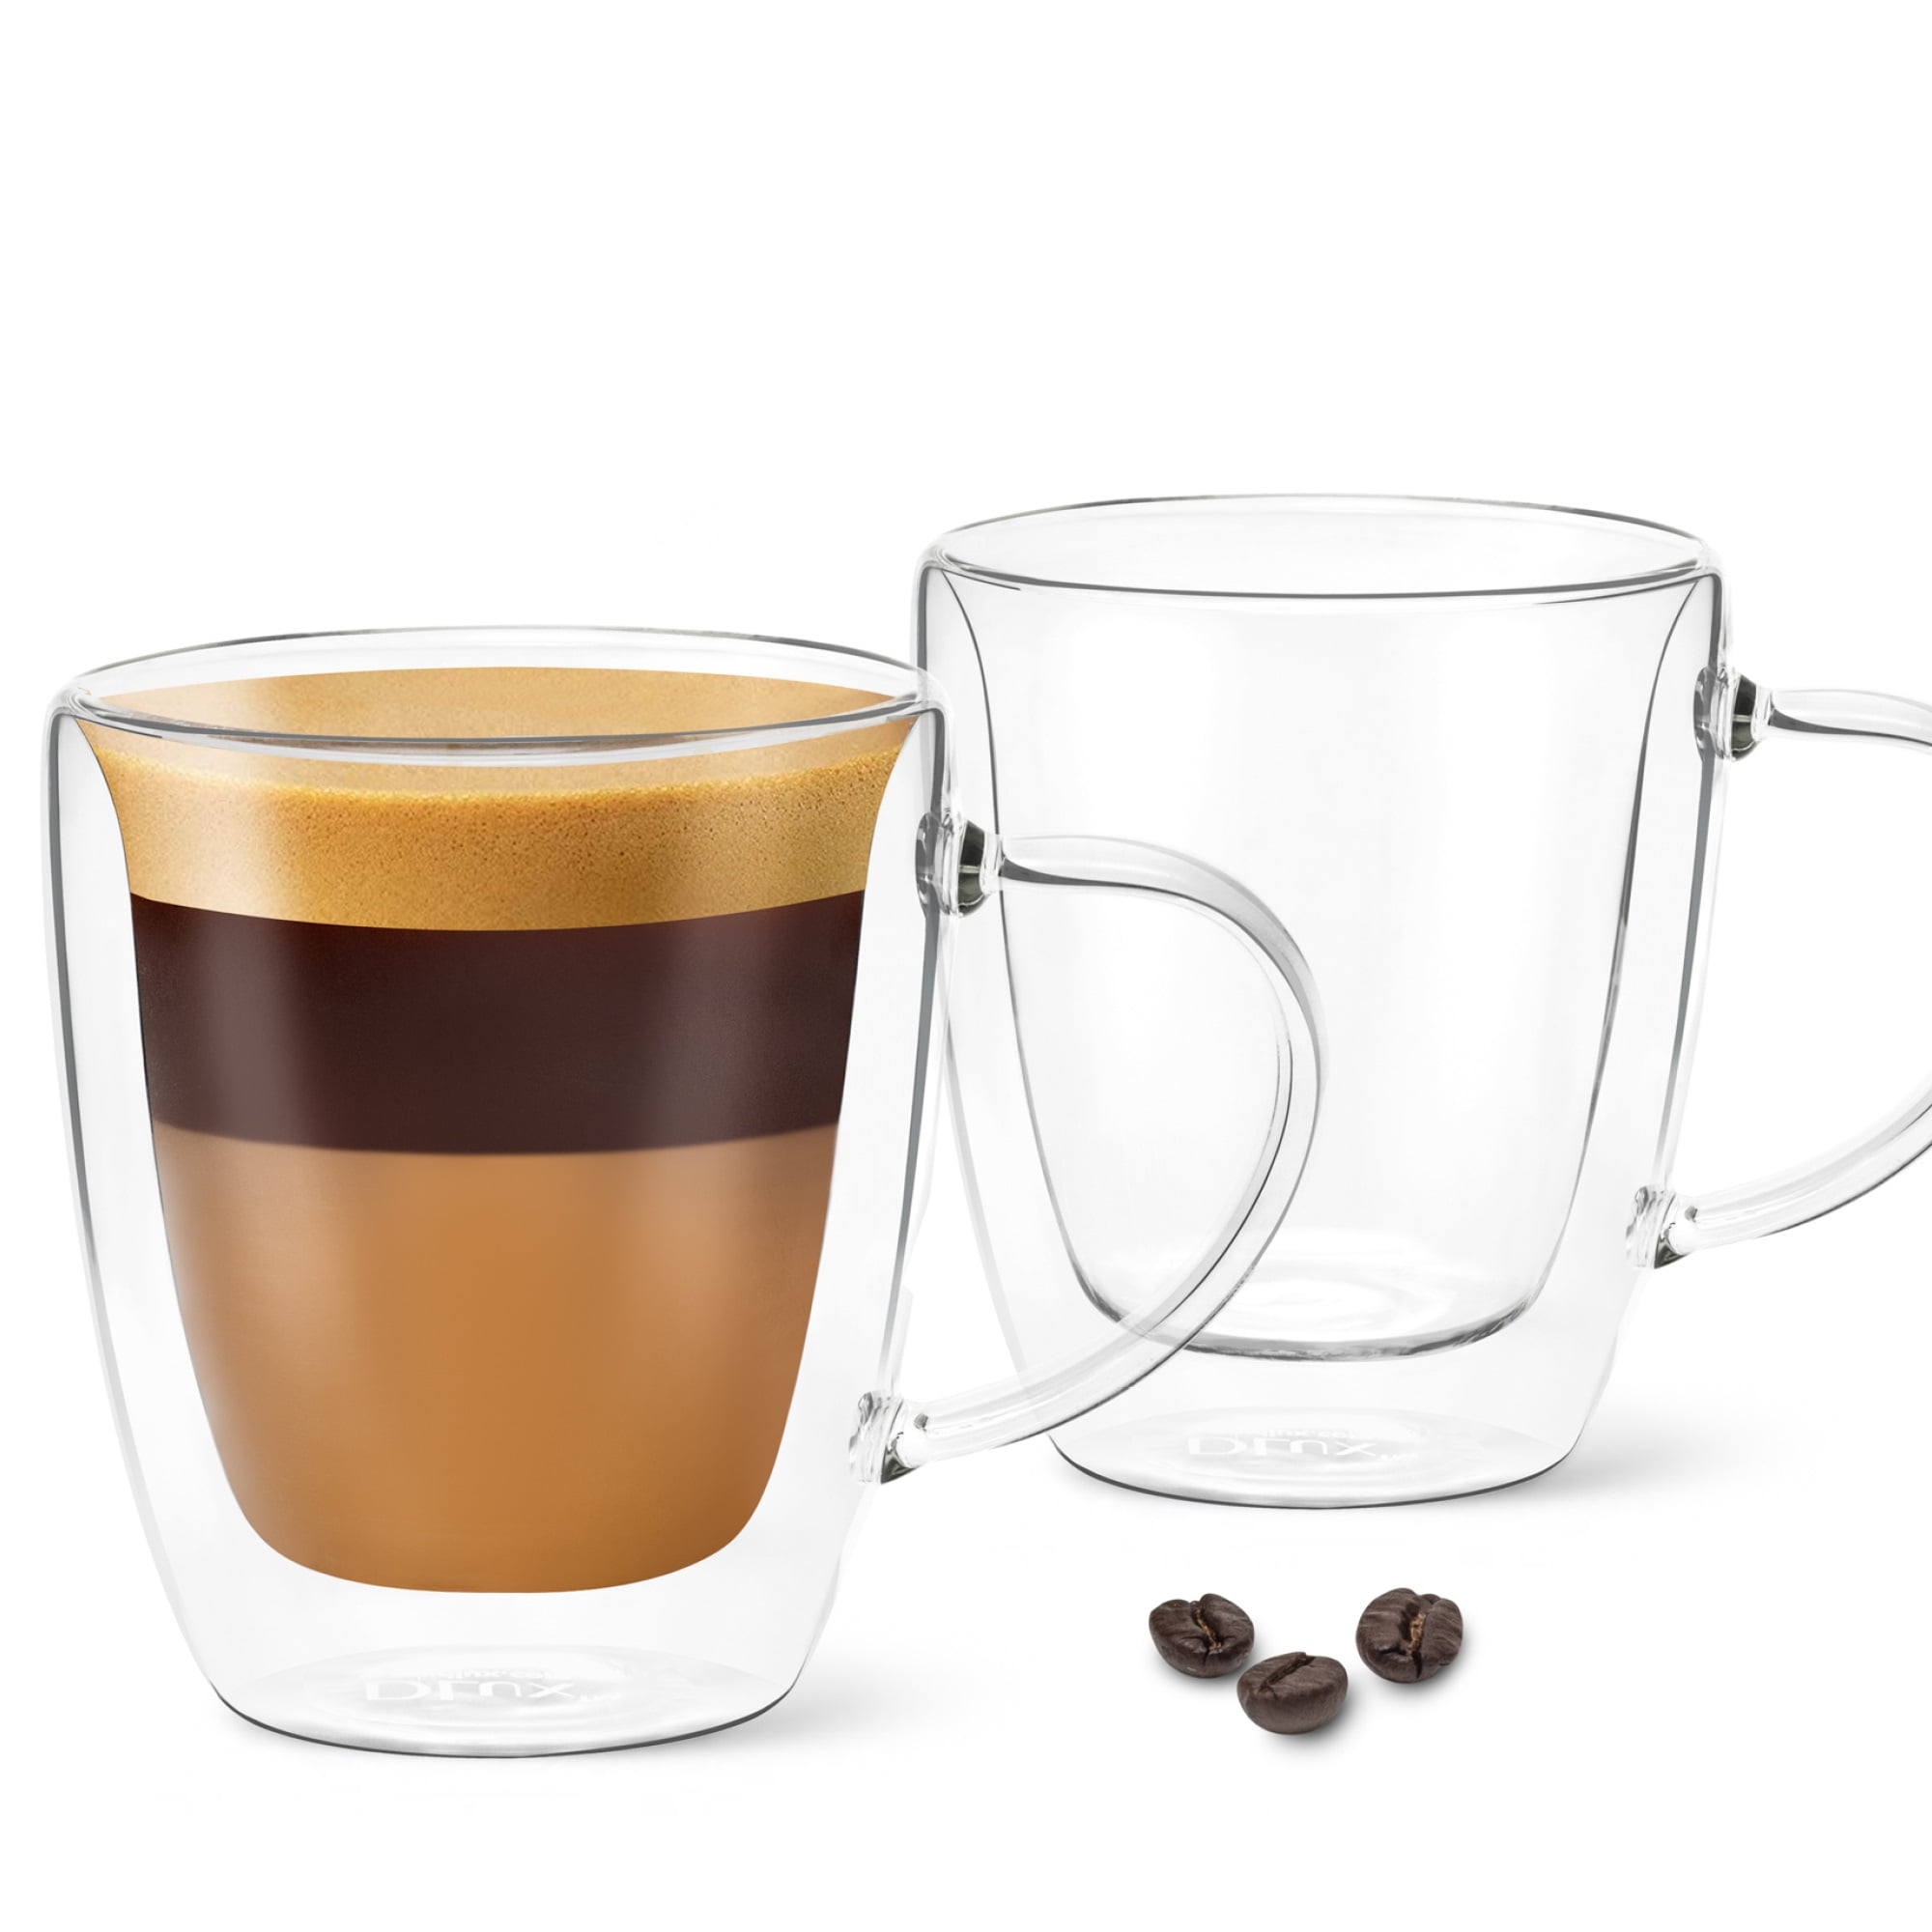 Elle Decor Double Wall Glass Mugs - Set Of 2, Perfect For Coffee